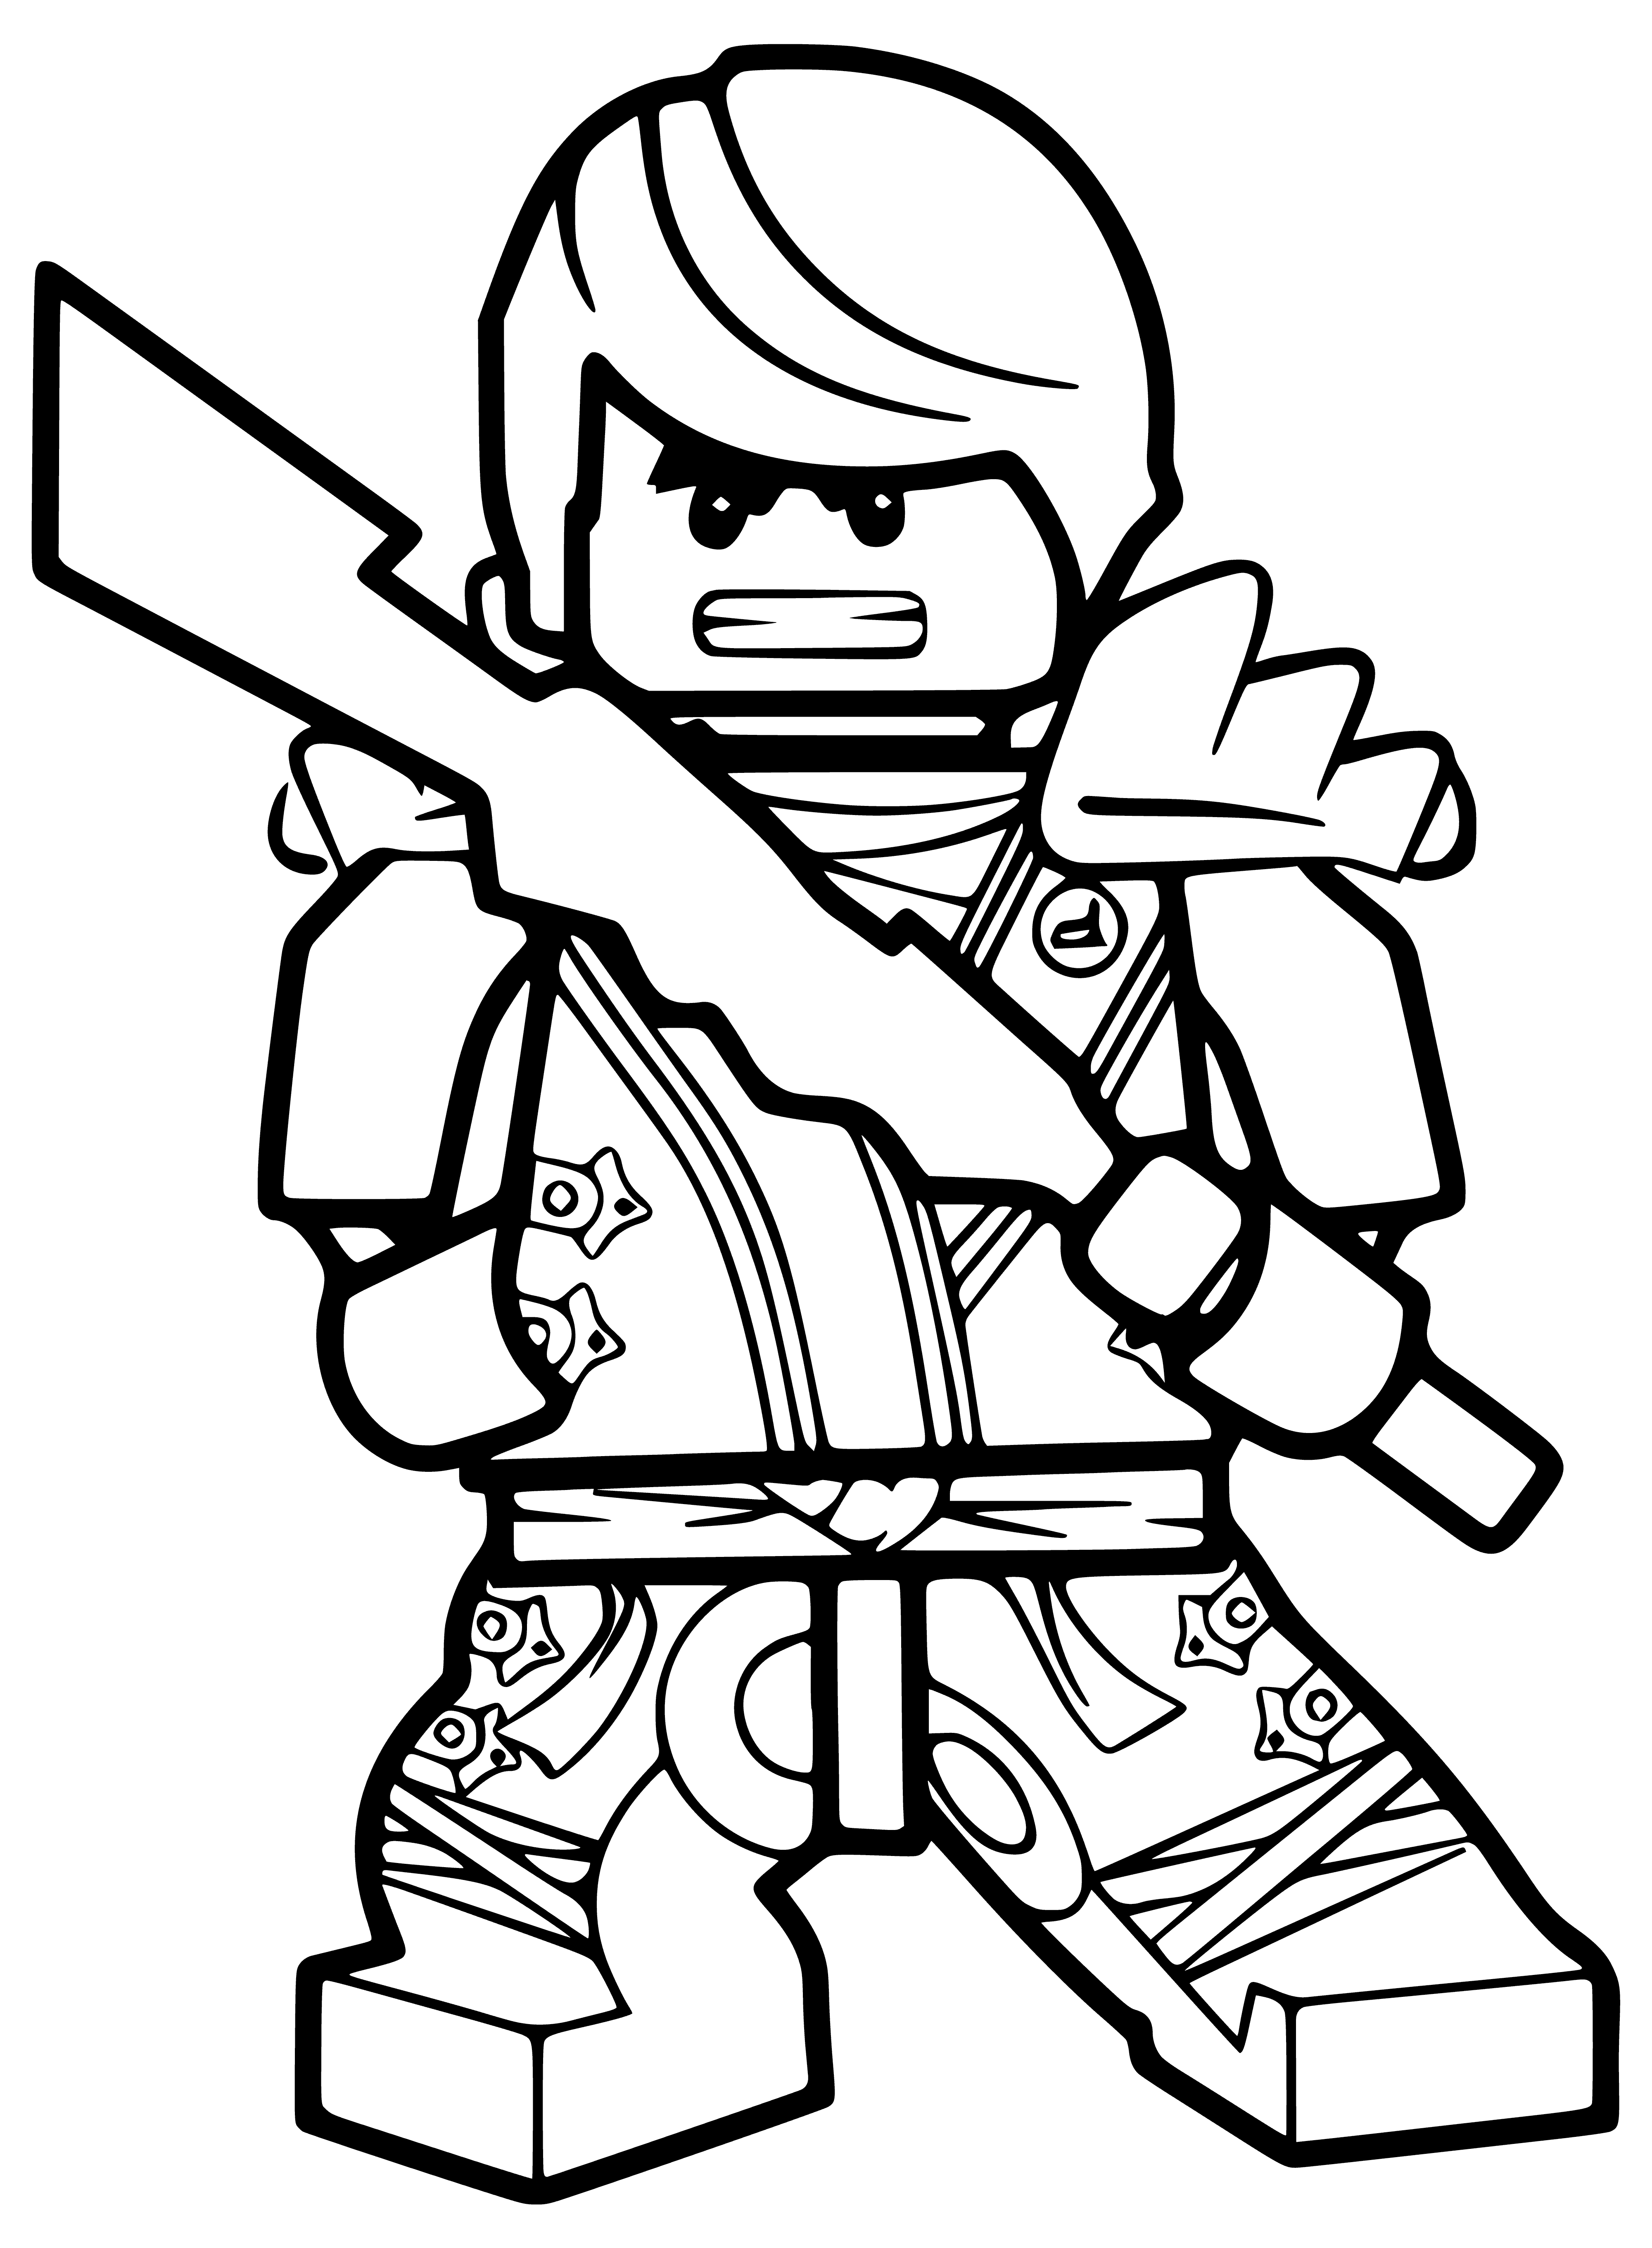 coloring page: 4 Lego ninjas in different colors stand/fly, hold swords, hoods up. Orange-bot left, blue-bot right, black-top left, white-top right.